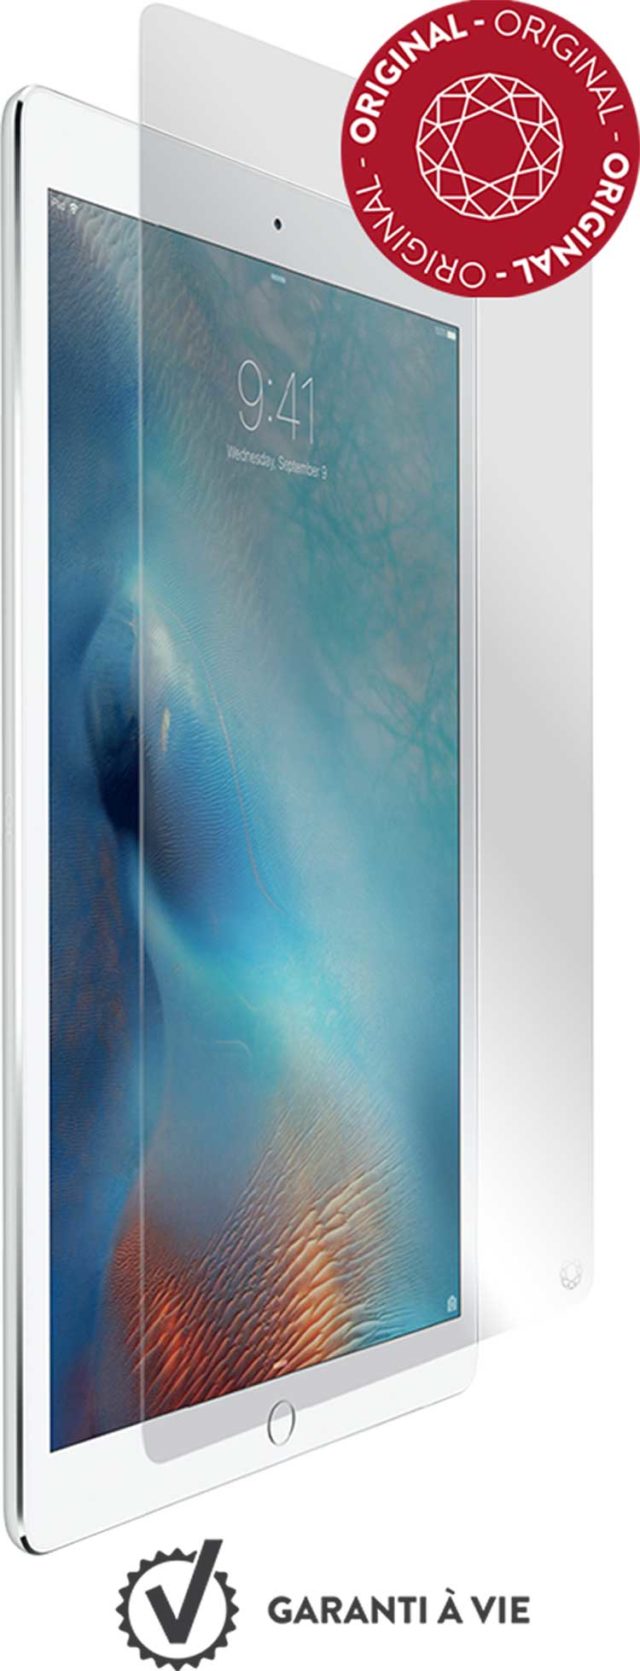 The tempered glass screen protector FORCE GLASS for iPad Pro 9.7 - Packshot